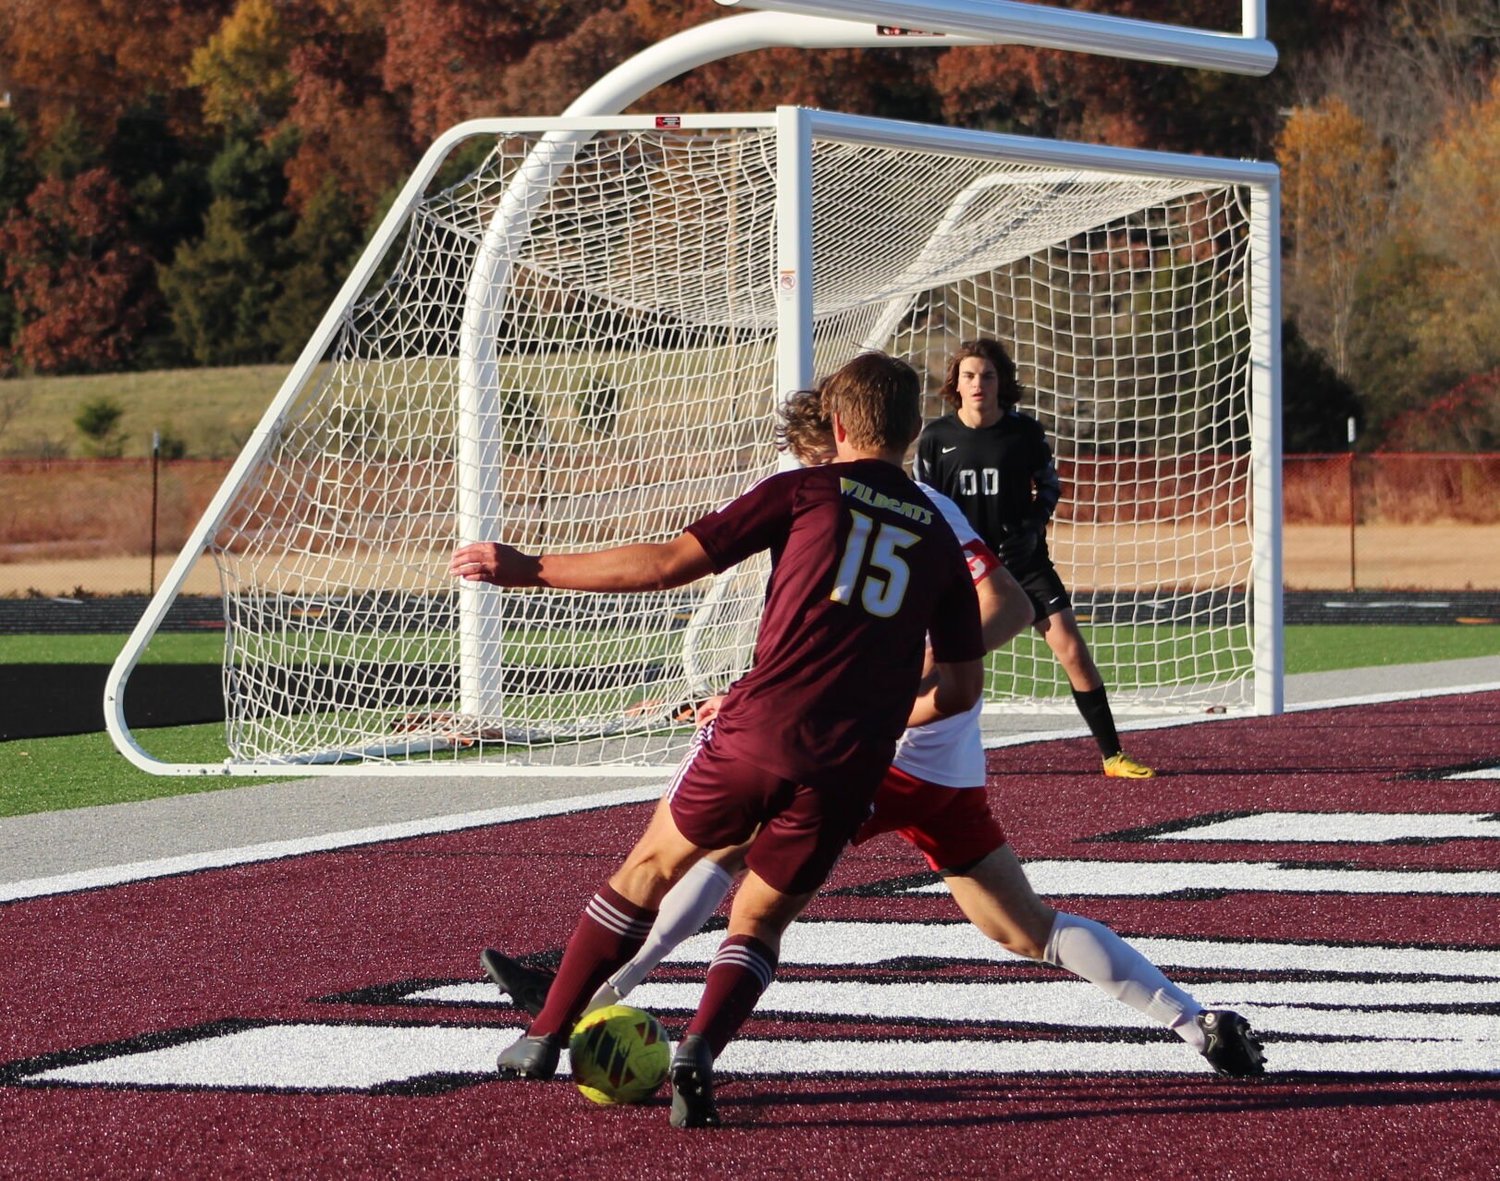 Weaving through the Bulldogs is Sophomore Marcus Sirb, scoring the first goal of game.